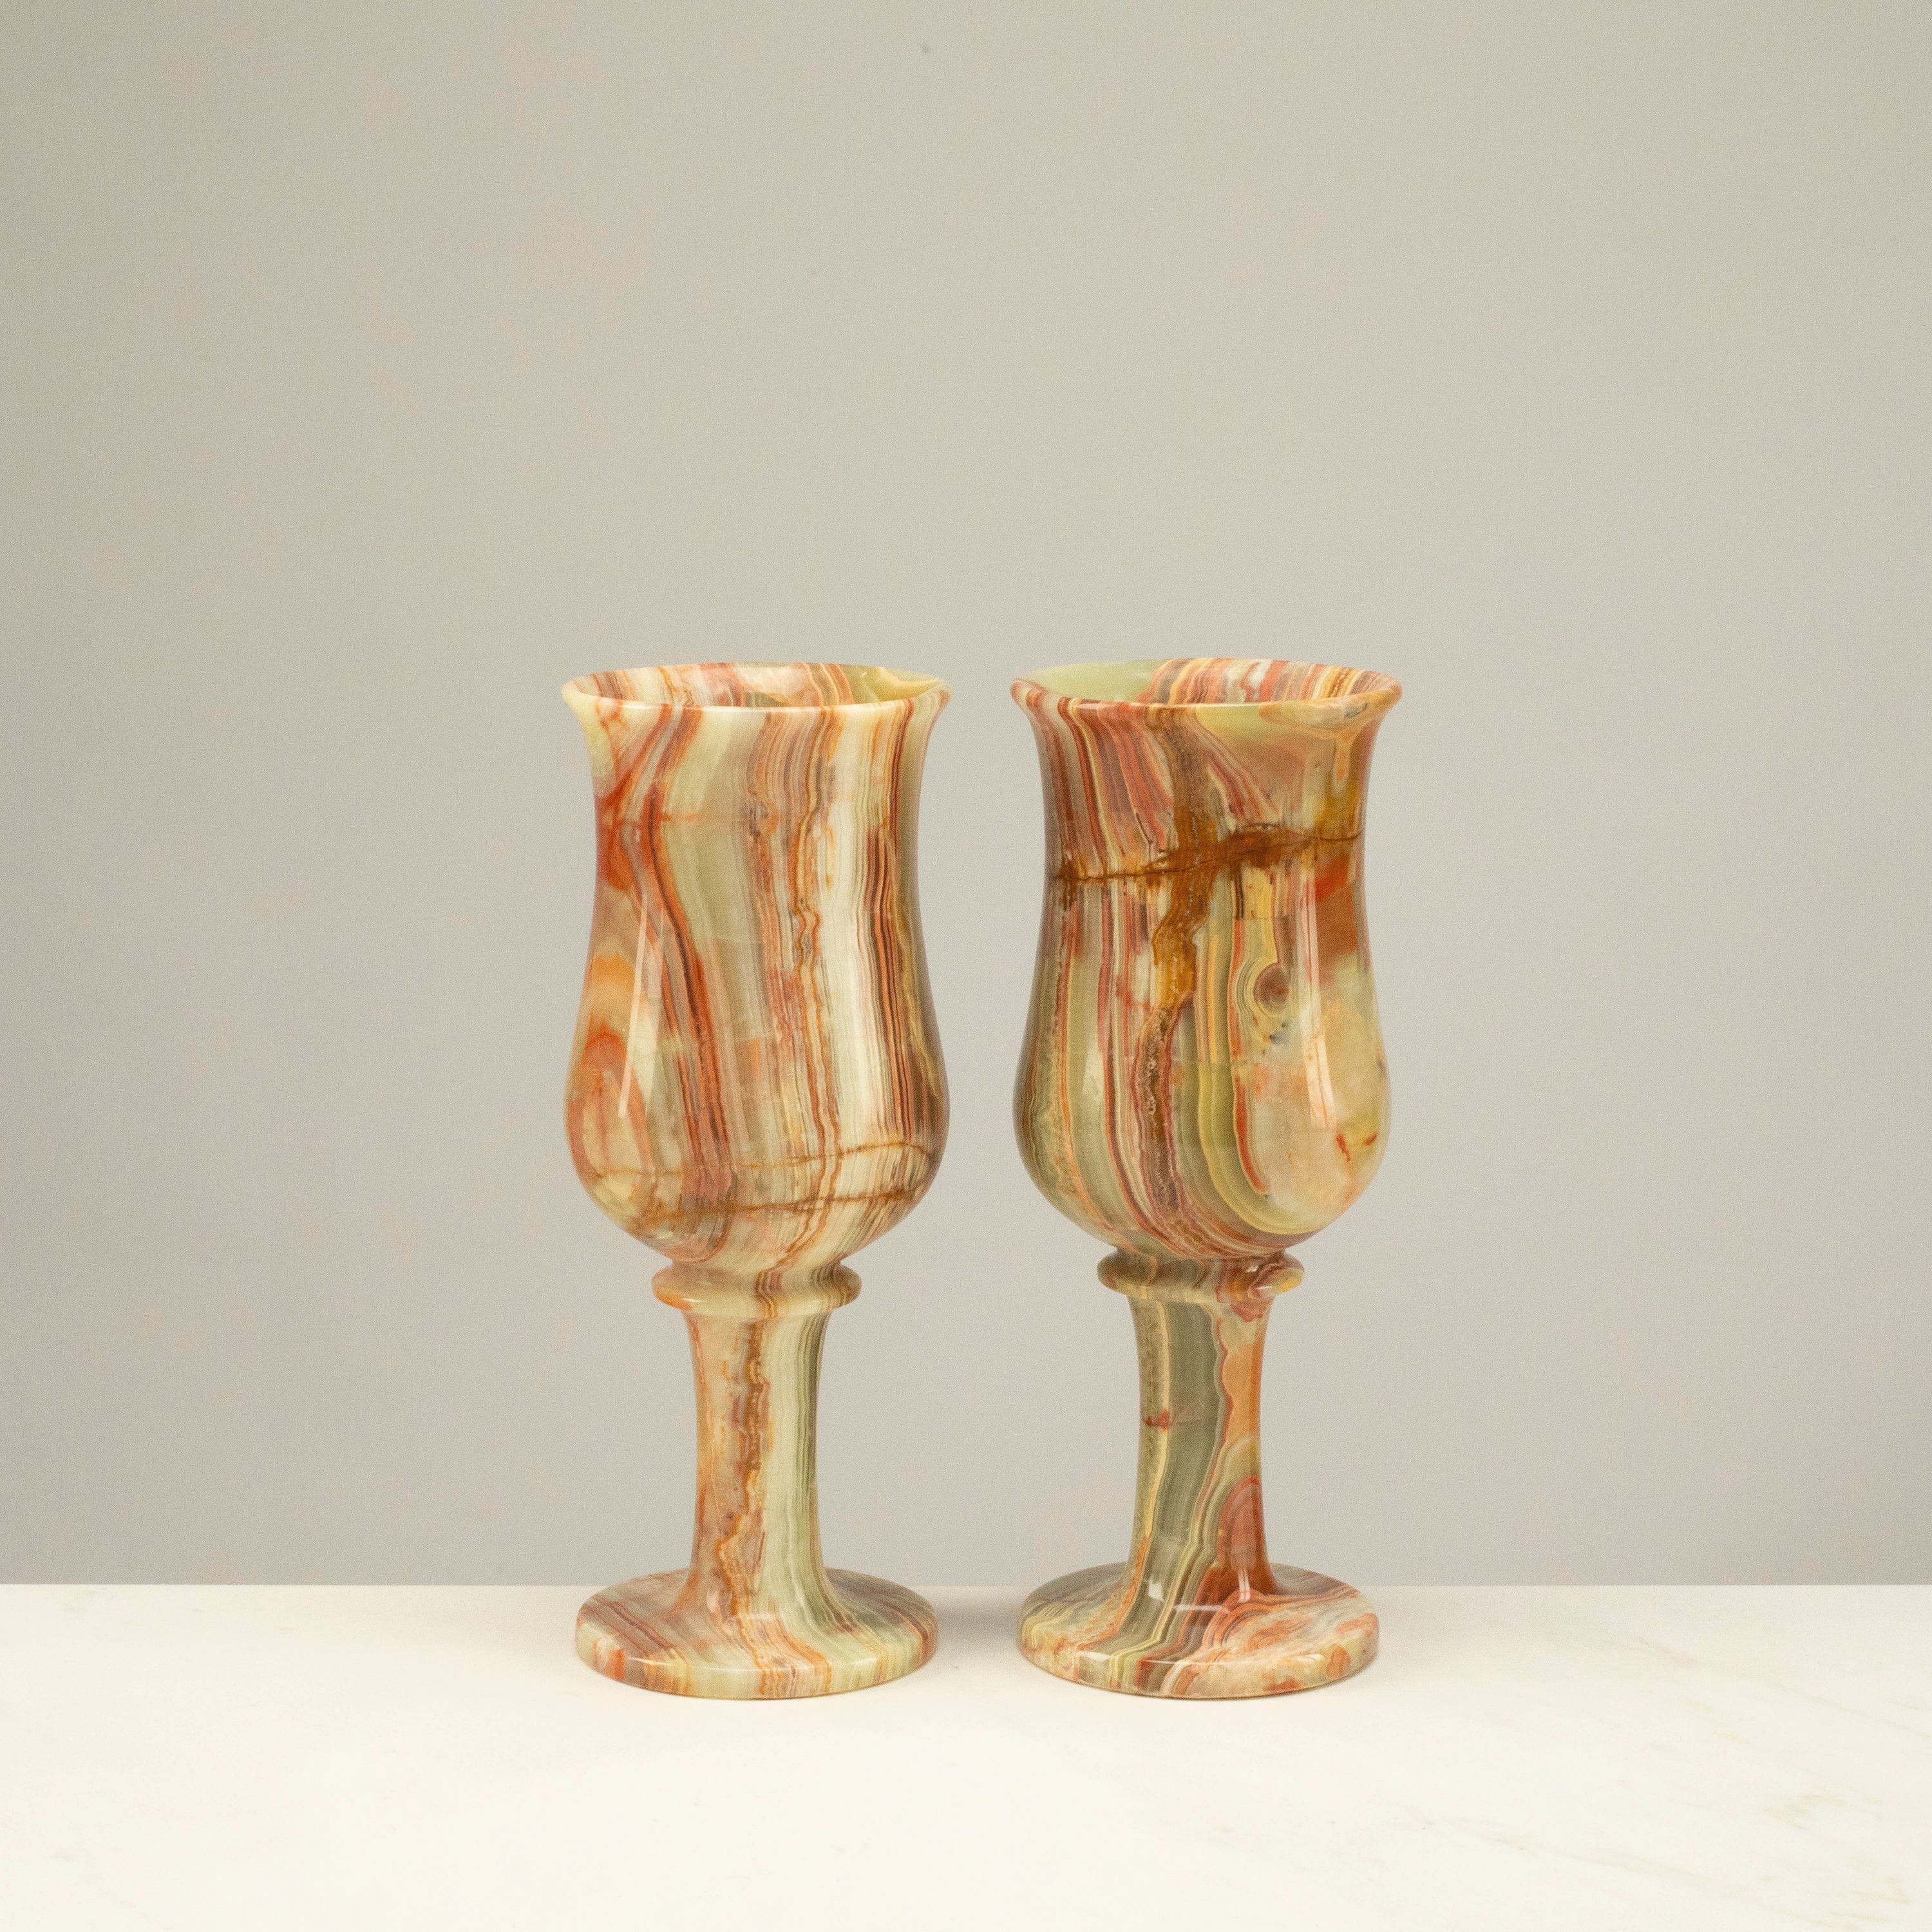 KALIFANO | Pakistan Green Onyx Champagne Glass Set of 2 - Hand-Carved